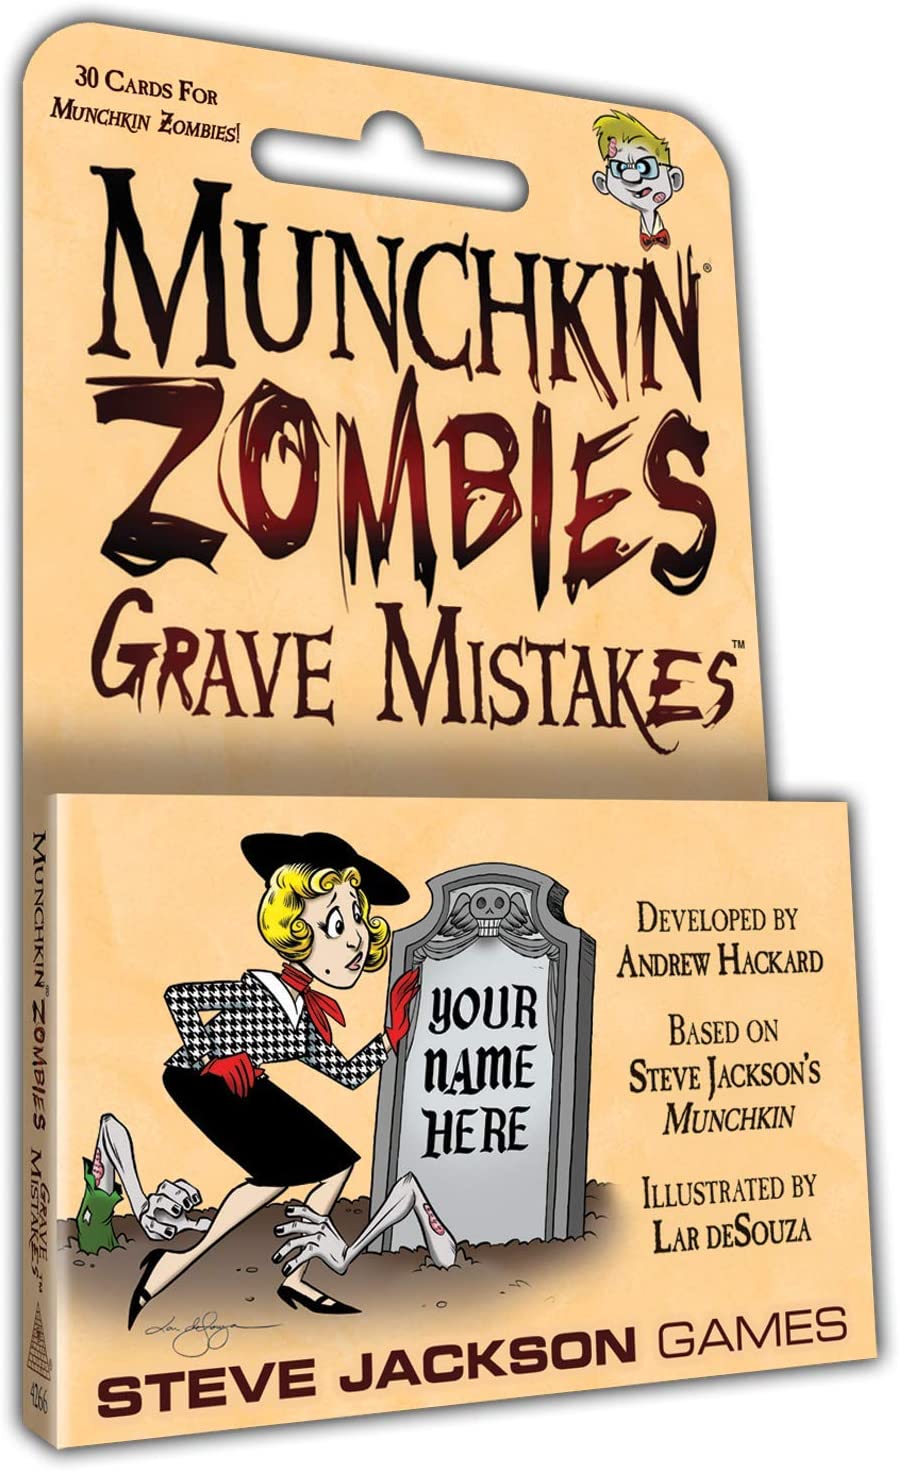 (BSG Certified USED) Munchkin Zombies - Grave Mistakes